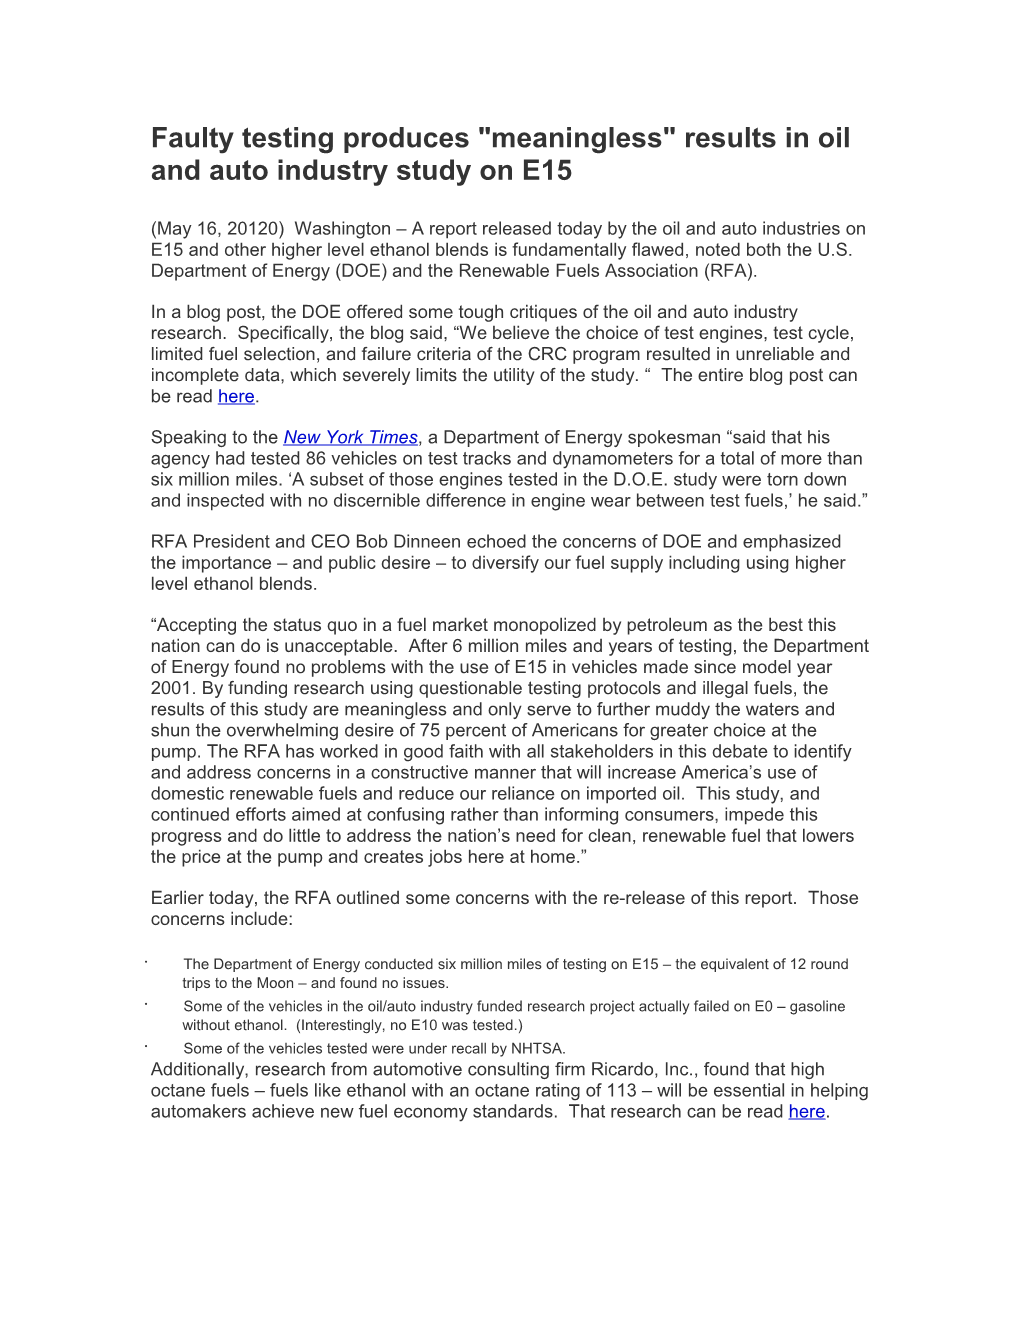 Faulty Testing Produces Meaningless Results in Oil and Auto Industry Study on E15